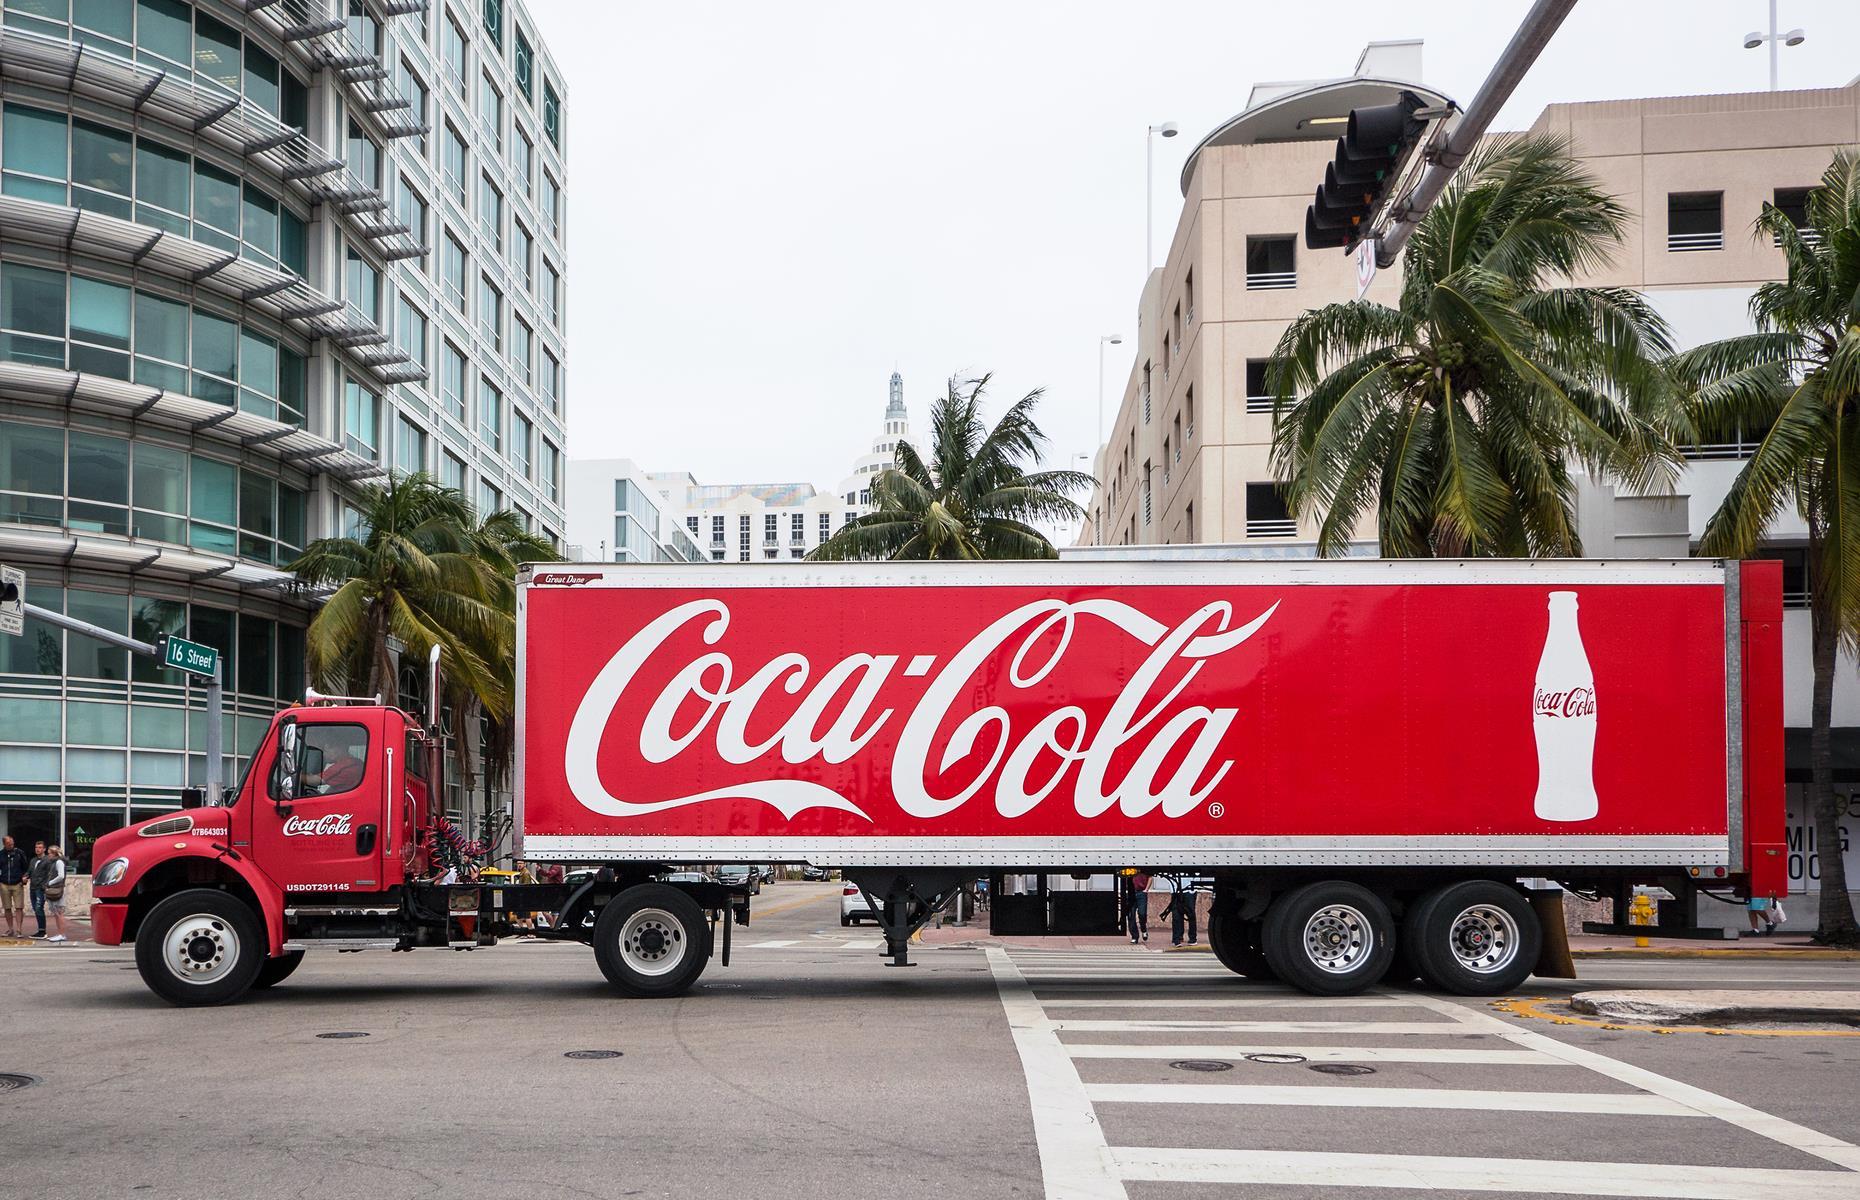 Coca-Cola thought local when it went global